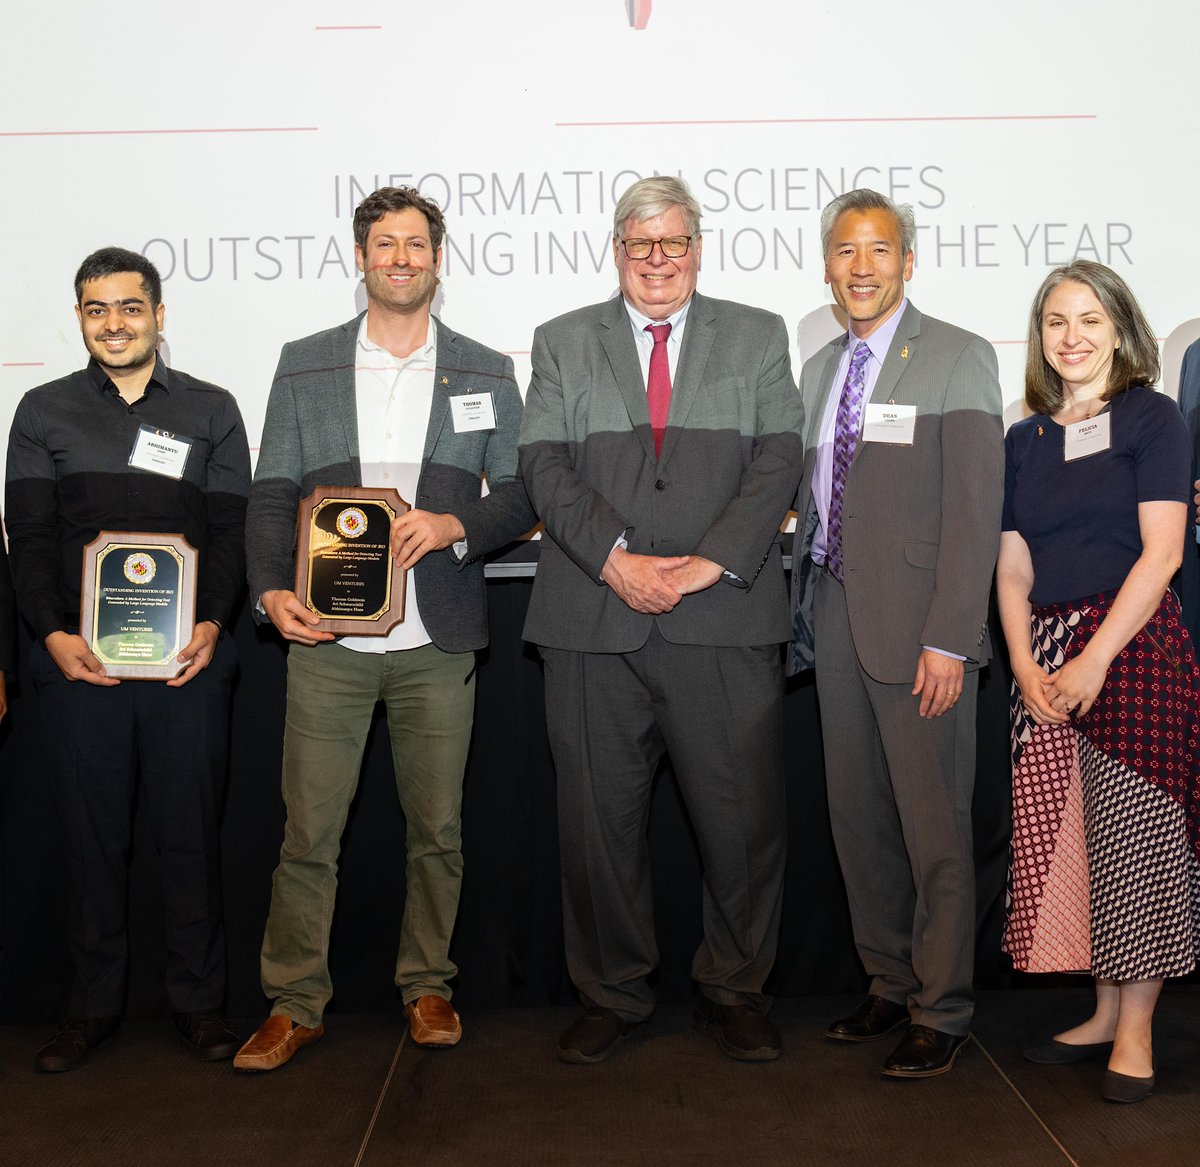 👏 Congrats to @tomgoldsteincs and grad student @ahans30 on winning a @UofMaryland Invention of the Year award! Read more: go.umd.edu/InventionAward…